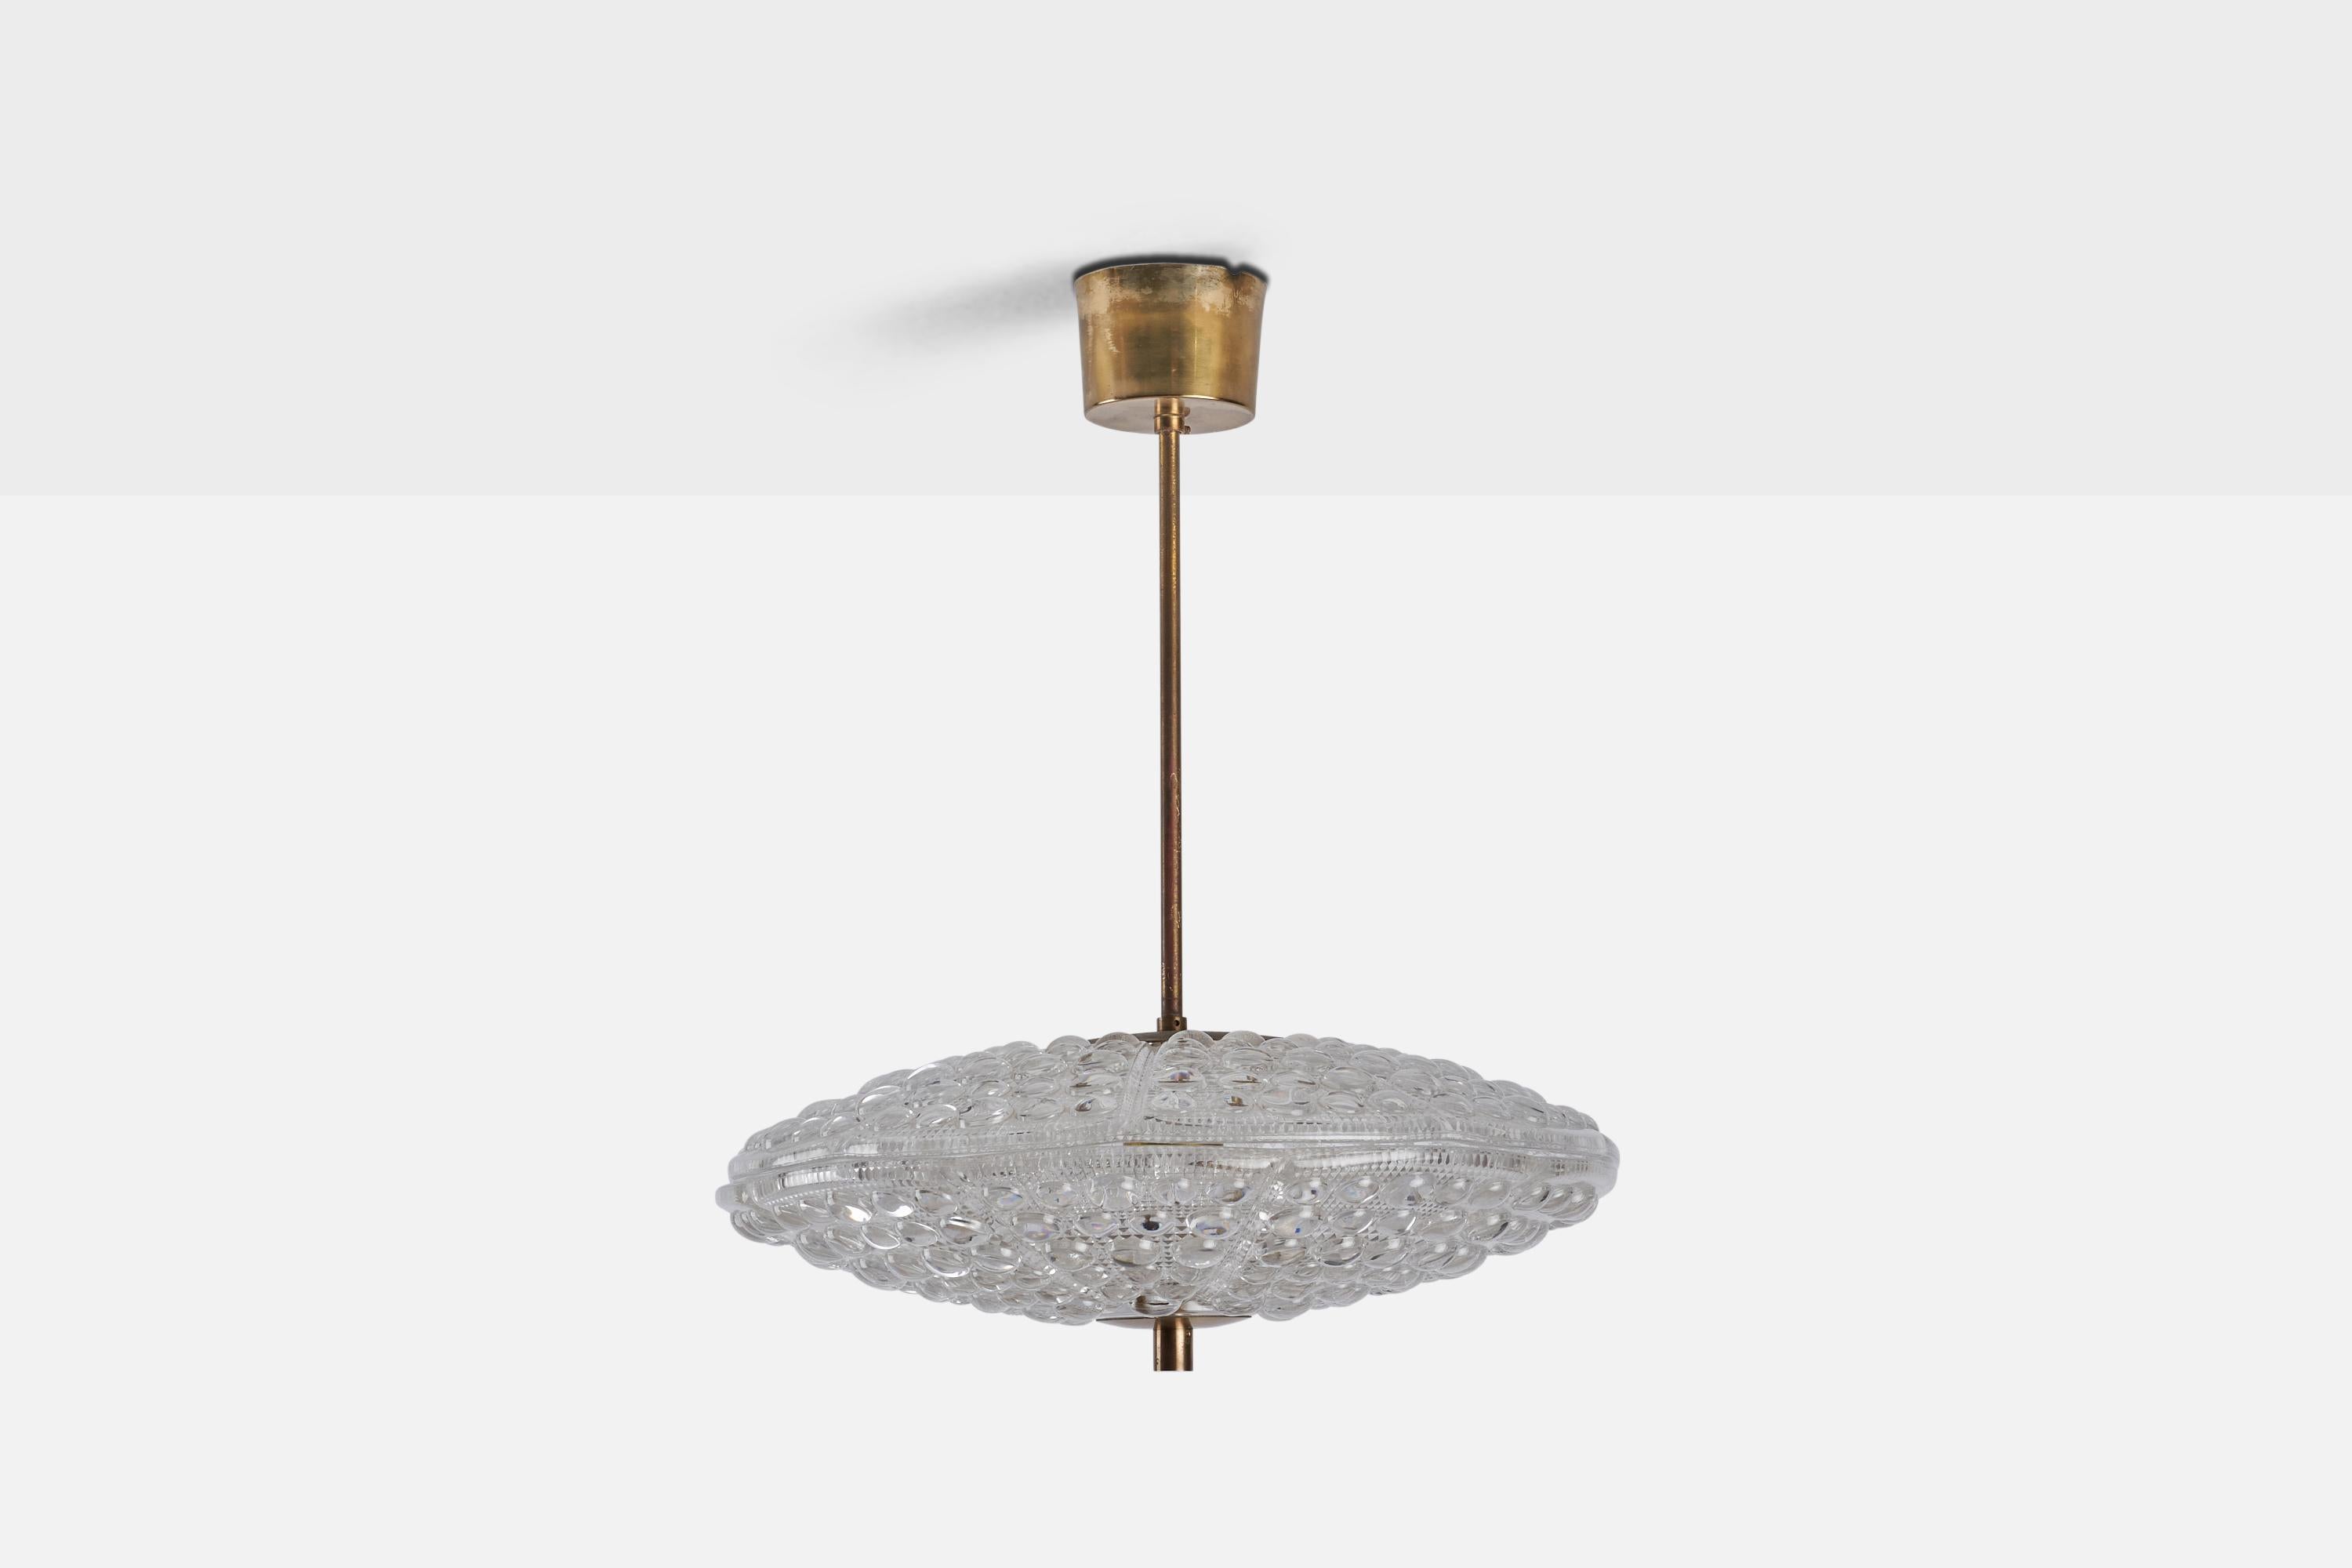 A brass and glass pendant light designed by Carl Fagerlund and produced by Orrefors, Sweden, 1940s.
Dimensions of canopy (inches) : 2.3” H x 3.4” Diameter
Socket takes standard E-14 bulb. There is no maximum wattage stated on the fixture. All